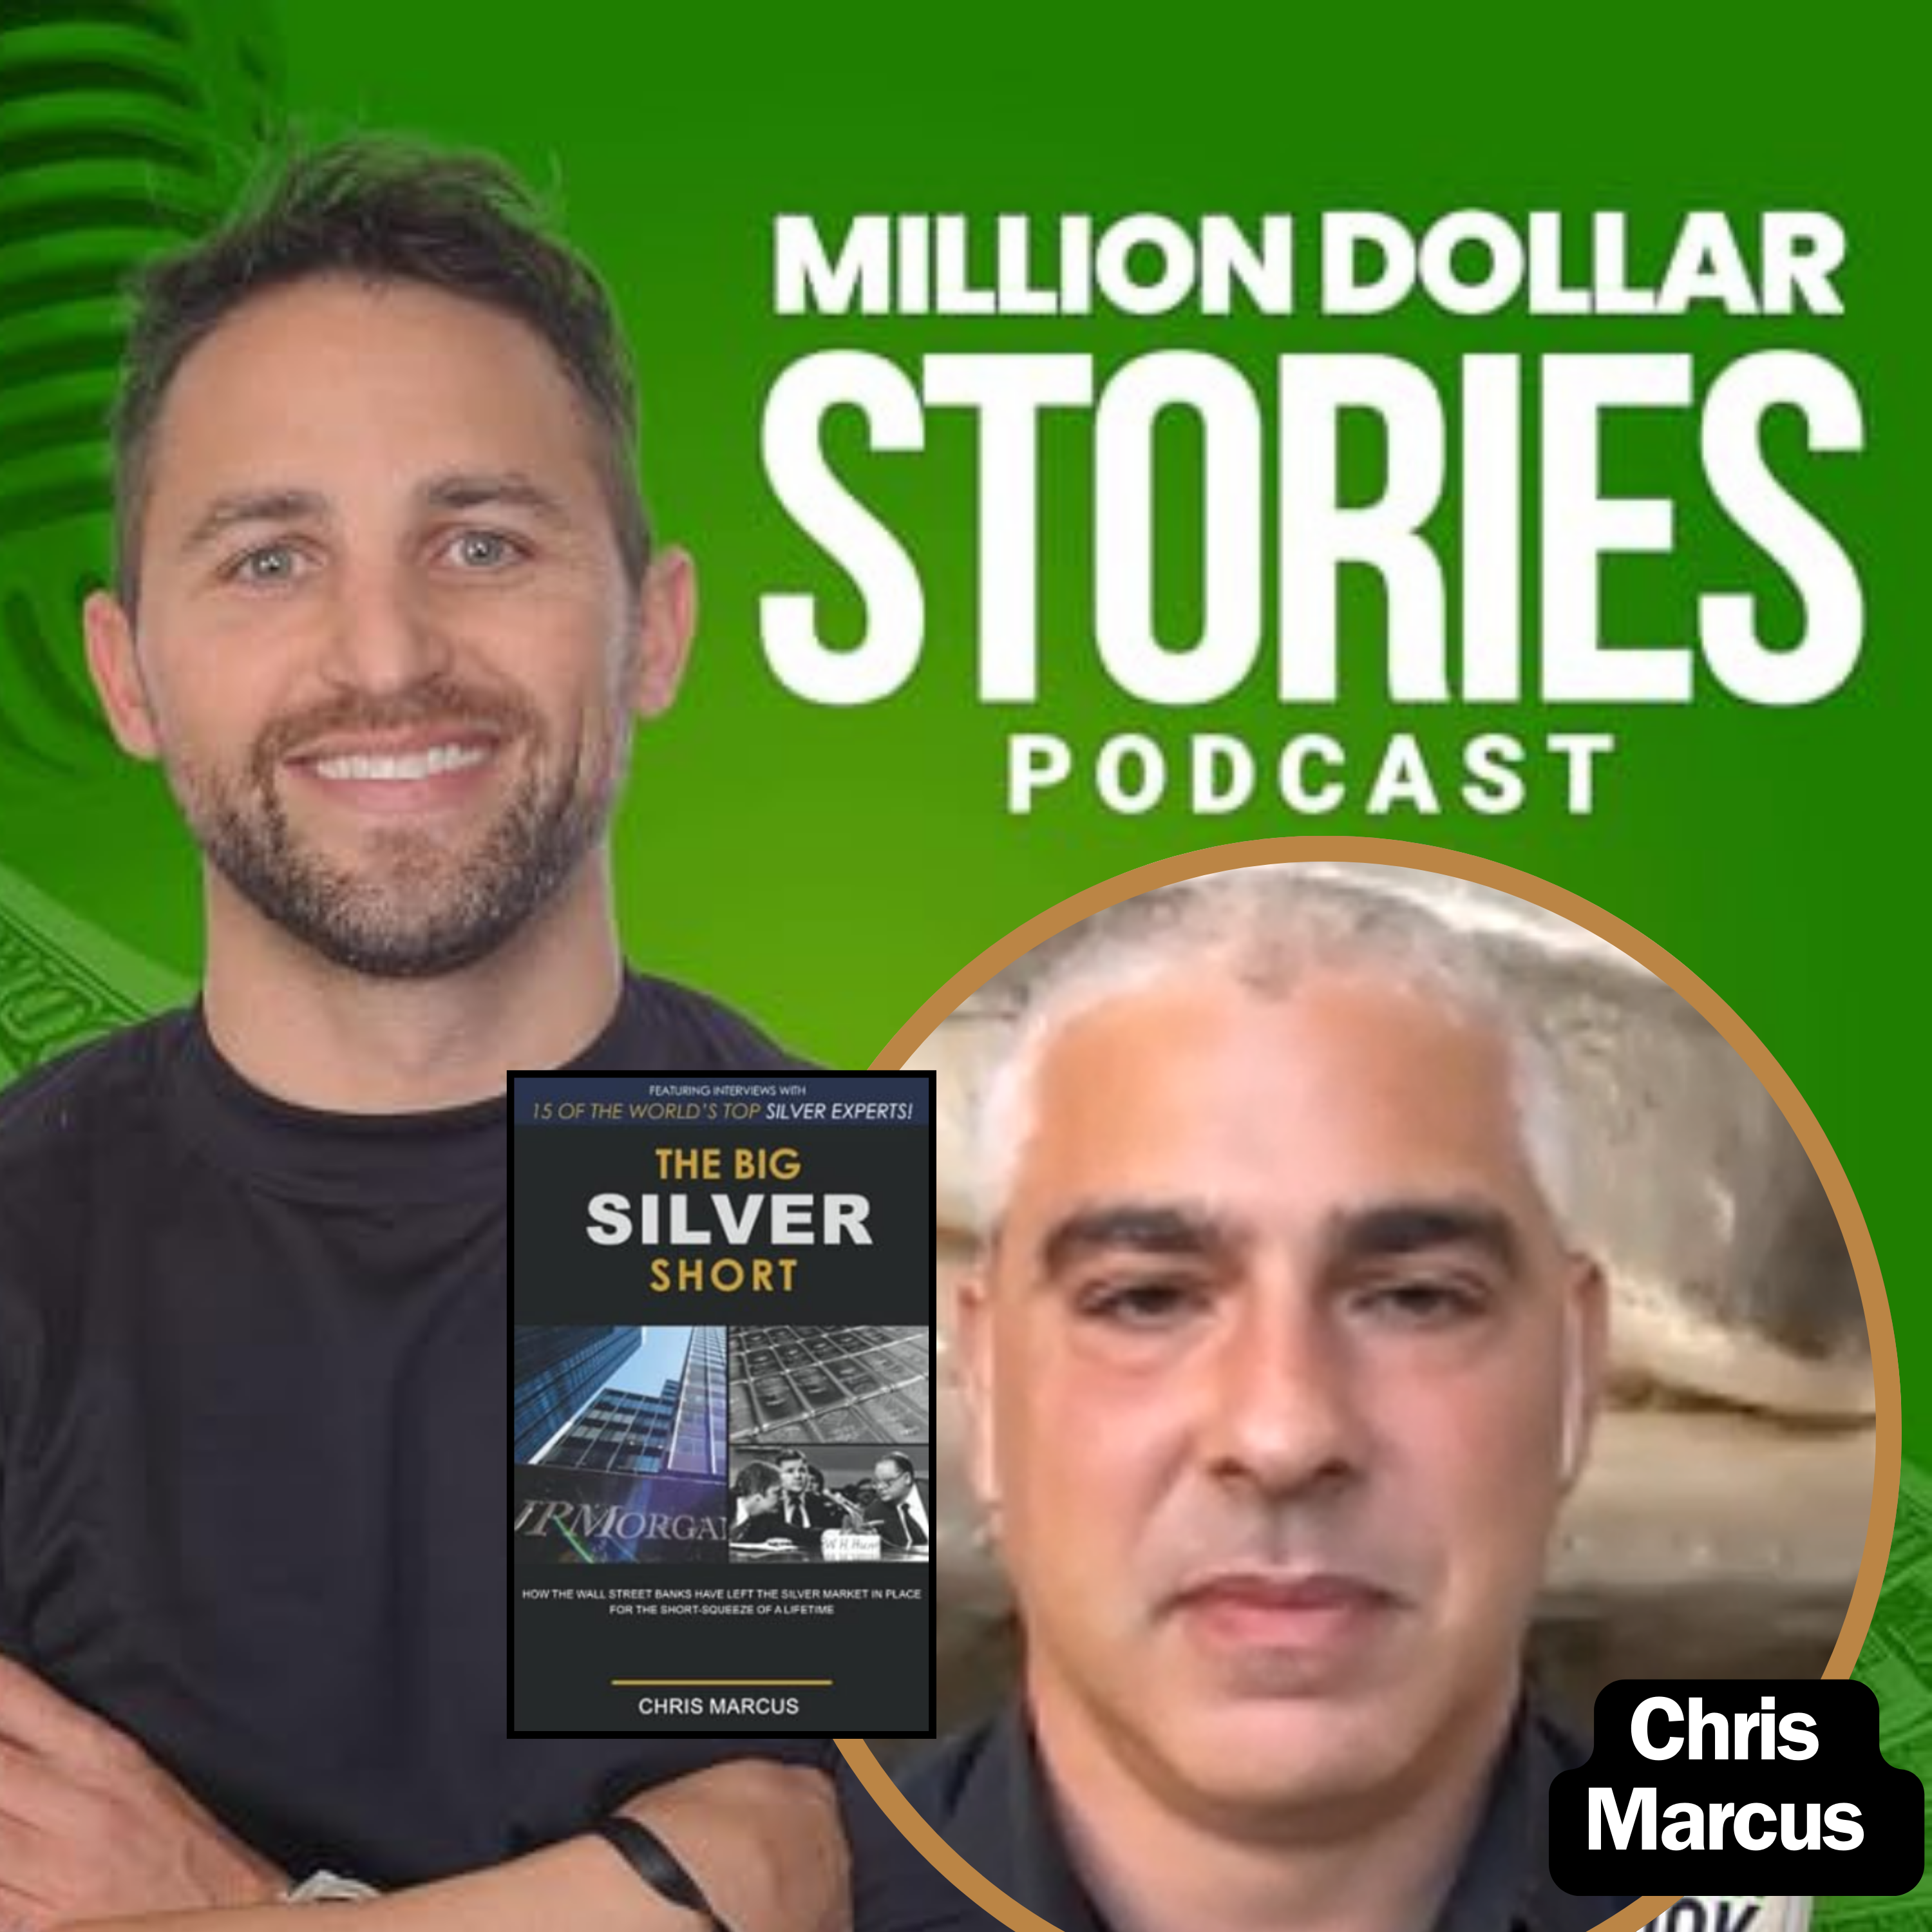 Chris Marcus – Author of “The Big Silver Short: How the Wall Street Banks Have Left the Silver Market in Place for the Short-Squeeze of a Lifetime”